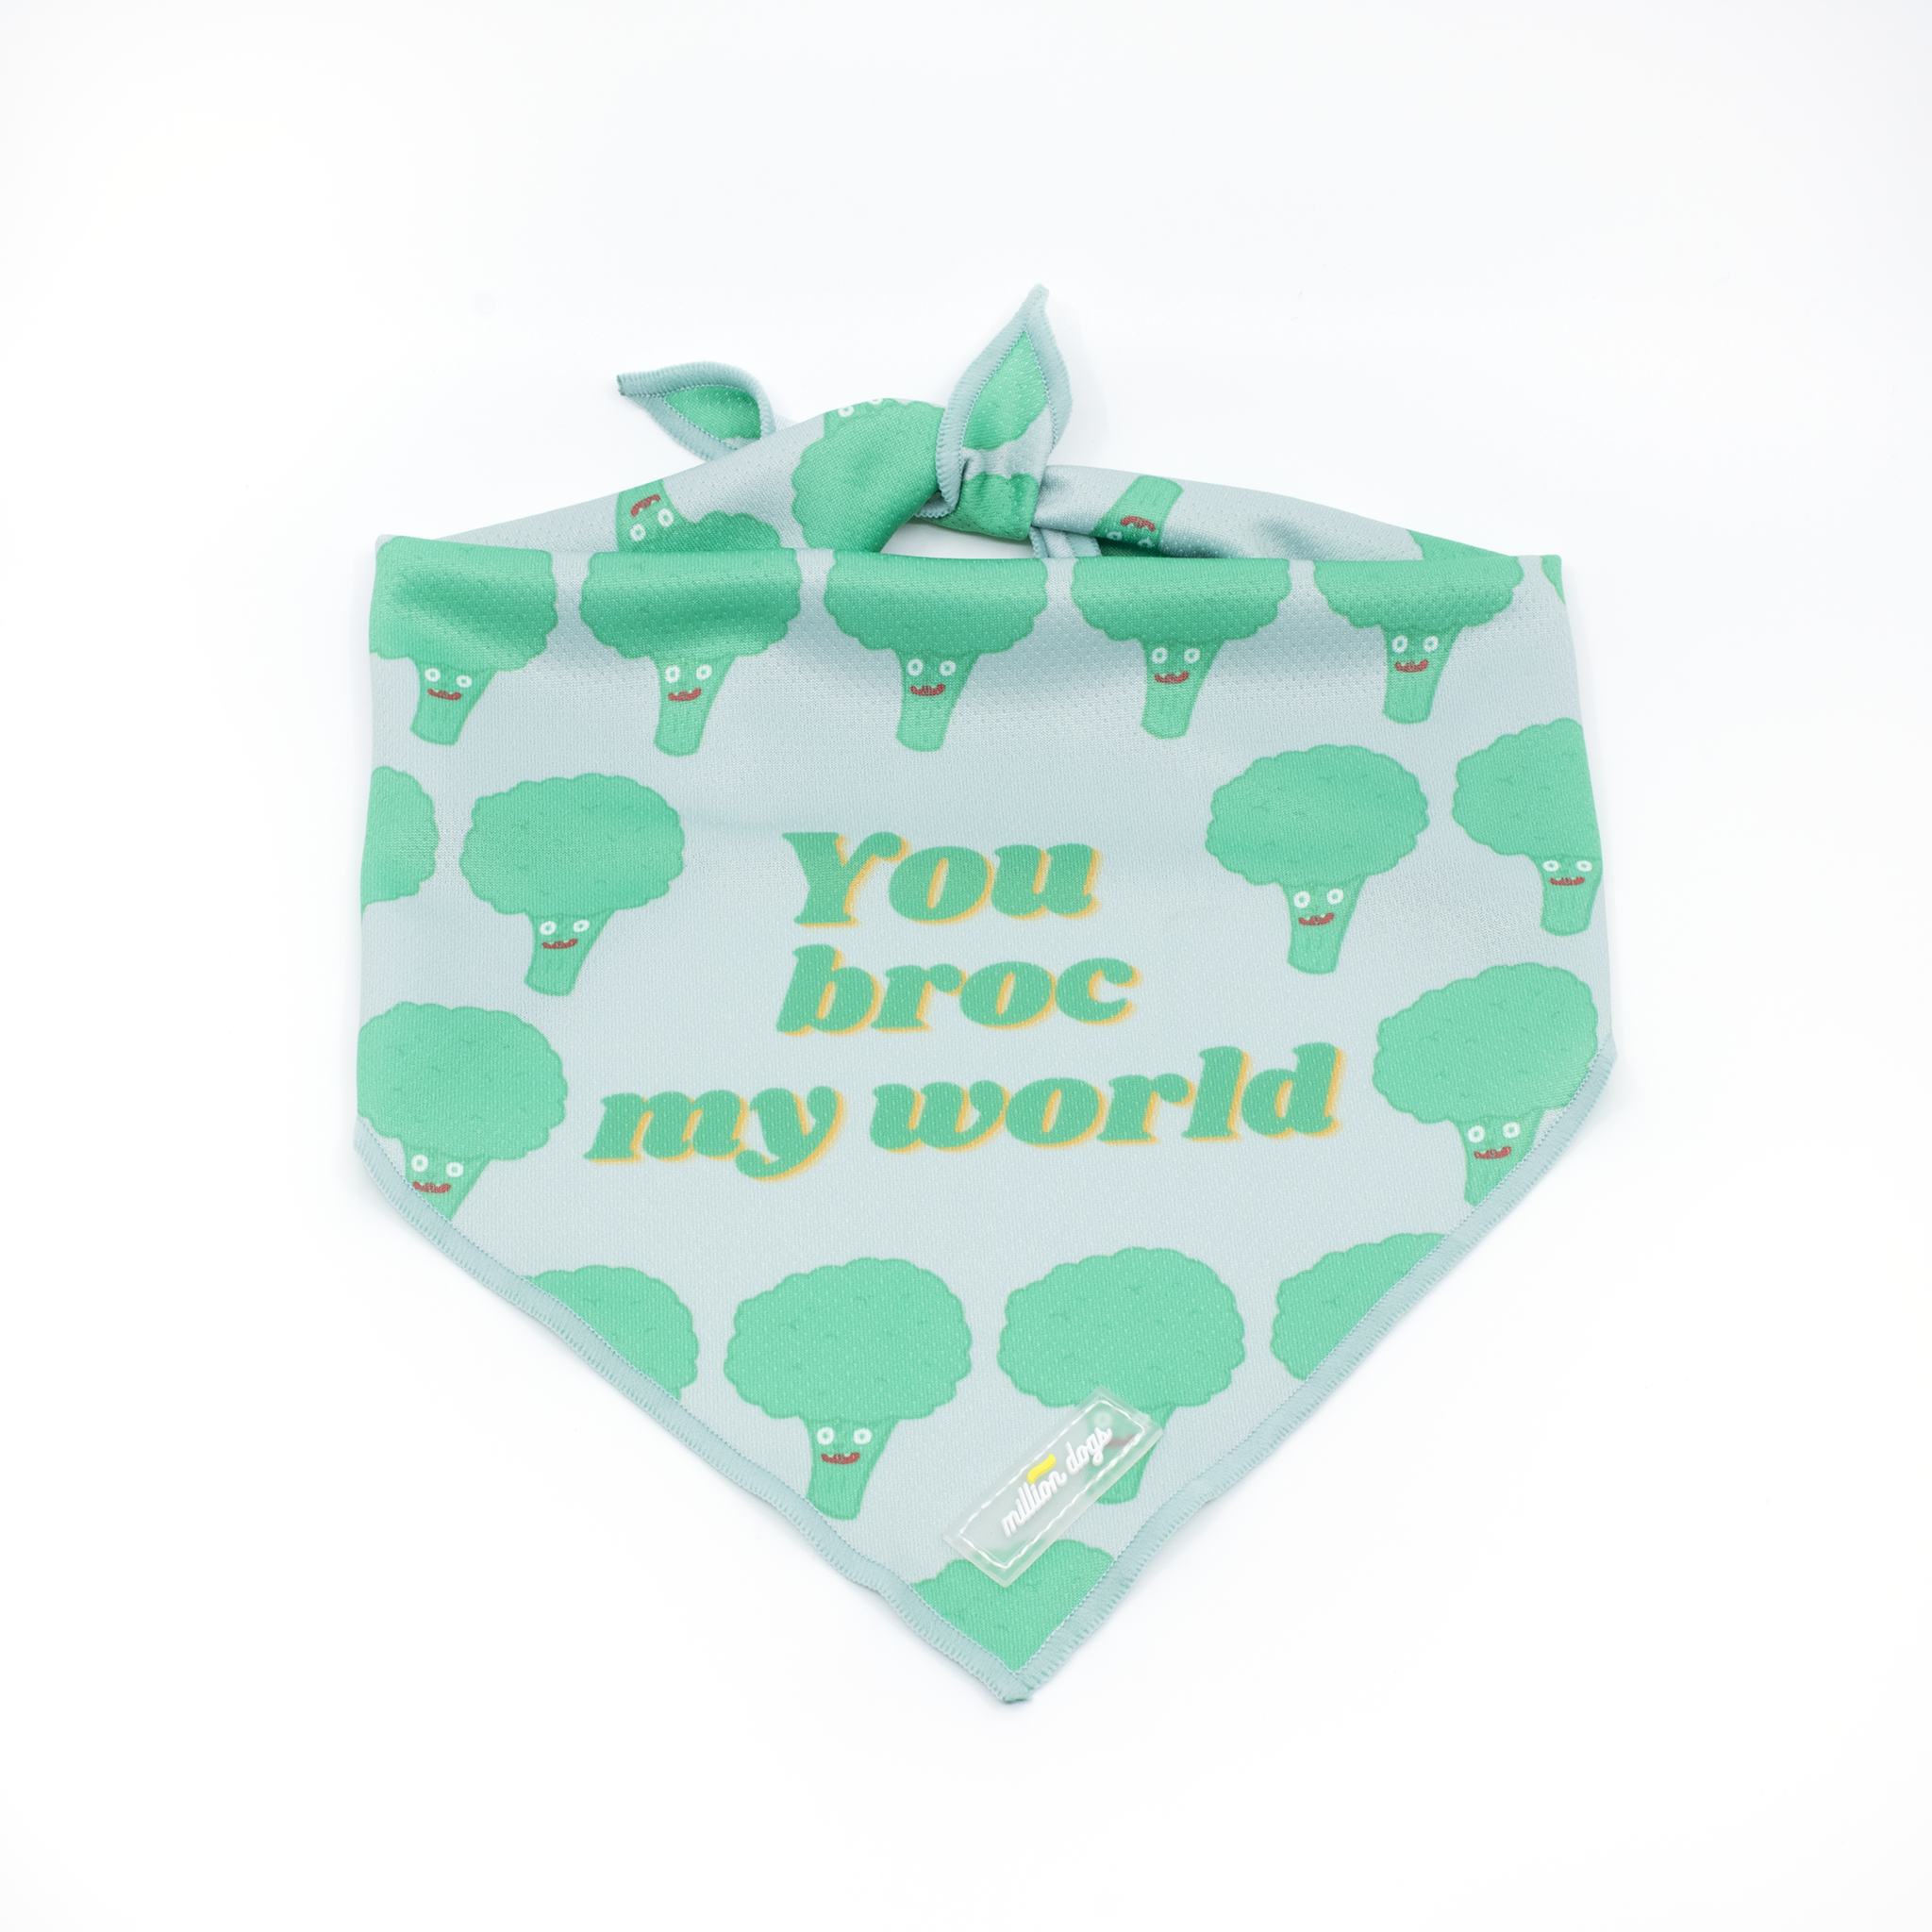 Dog cooling bandana with broccoli design made by Million Dogs